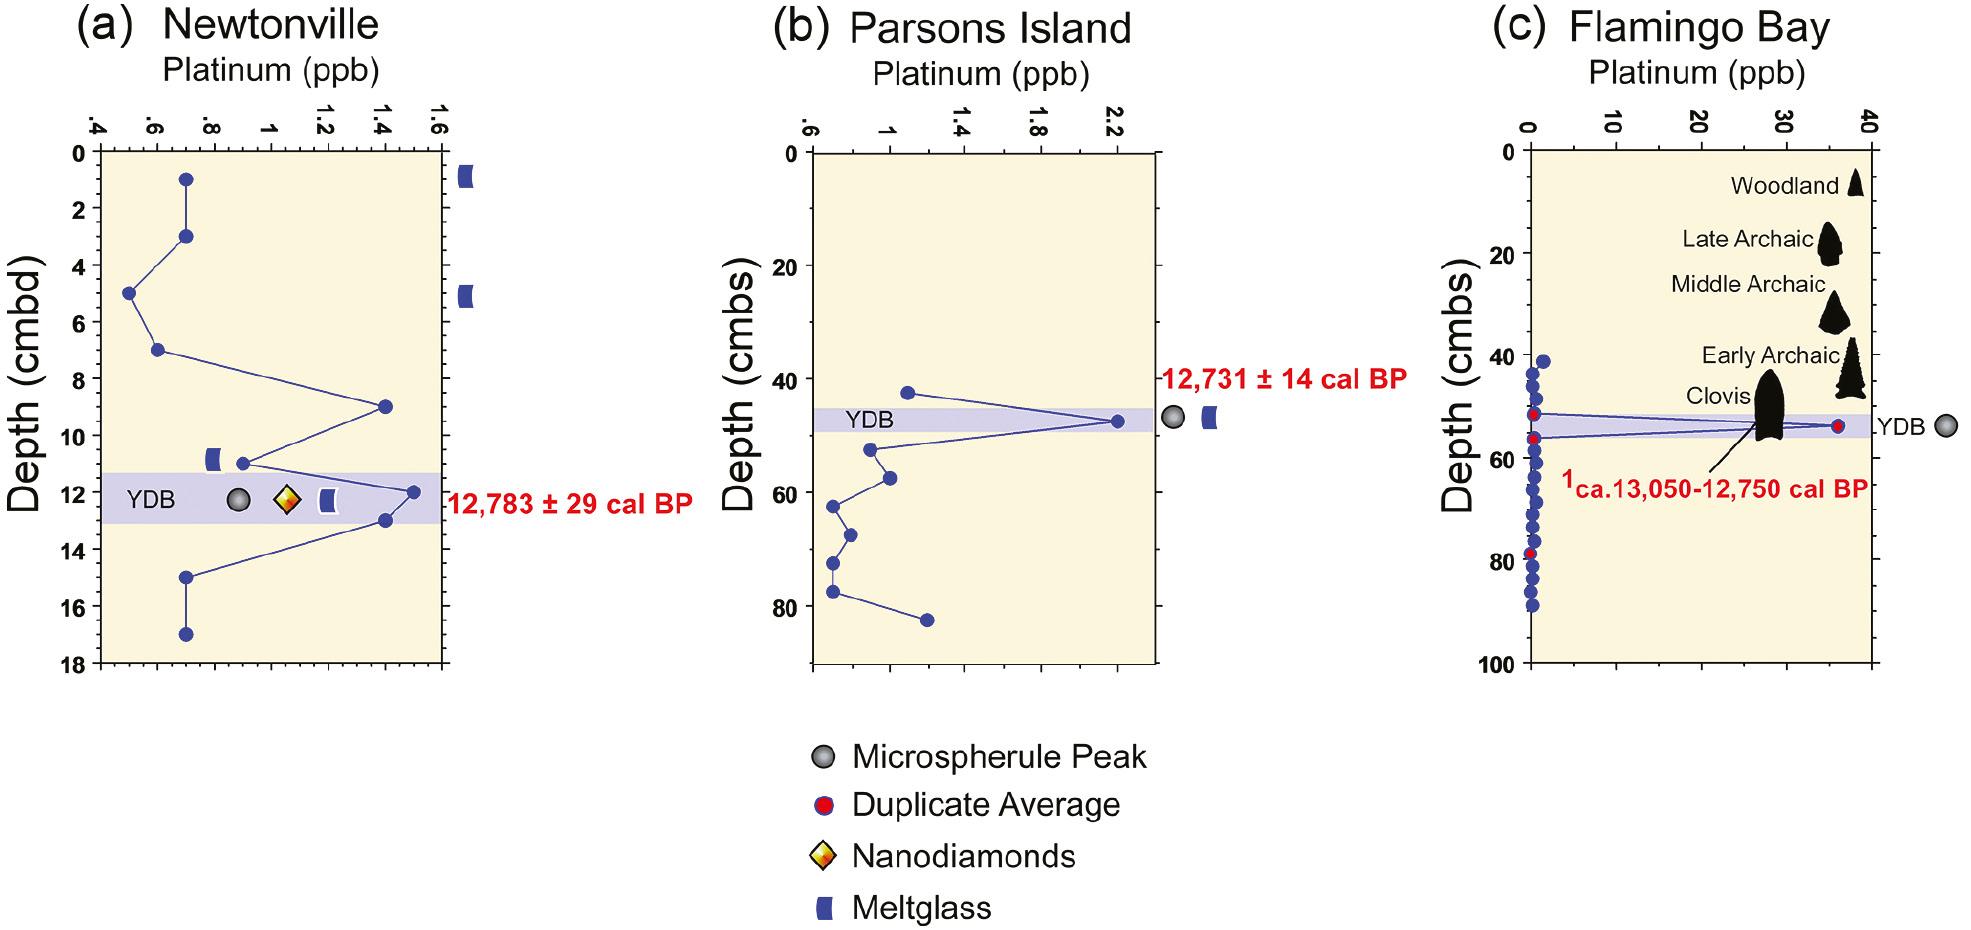 Stratigraphic Distribution of analyzed proxies and placement of the YDB layer. (a) Newtonville, microstrat (b) Parsons Island, and (c) Flamingo Bay. Graphs show platinum (Pt) abundances in ppb (error = ±0.1 ppb), the Pt peak, the microspherules peak, and the presence of nanodiamonds and meltglass. Also shown is generalized archaeostratigraphic data for Flamingo Bay (38AK469) (i.e., Paleoindian through Woodland hafted biface silhouettes), radiocarbon dates (cal BP), and YDB layer (blue bar) each sample for the Flamingo Bay sequence is plotted in the middle of the sample interval. The accepted date range for the Clovis culture is ∼13,050–12,750 cal BP [93], and the YDB proxy layer overlaps with the base of the Younger Dryas episode estimated at ∼50–55 cmbs. In Kennett et al. [1], a Bayesian analysis of dates from YDB sites across North America shows synchronous deposition of the YDB proxy layer at ∼12,785 ± 50 years (range 12,735 to 12,835) cal BP [3]. Note that Pt abundance on the graph is an average of two measurements from the same sample.